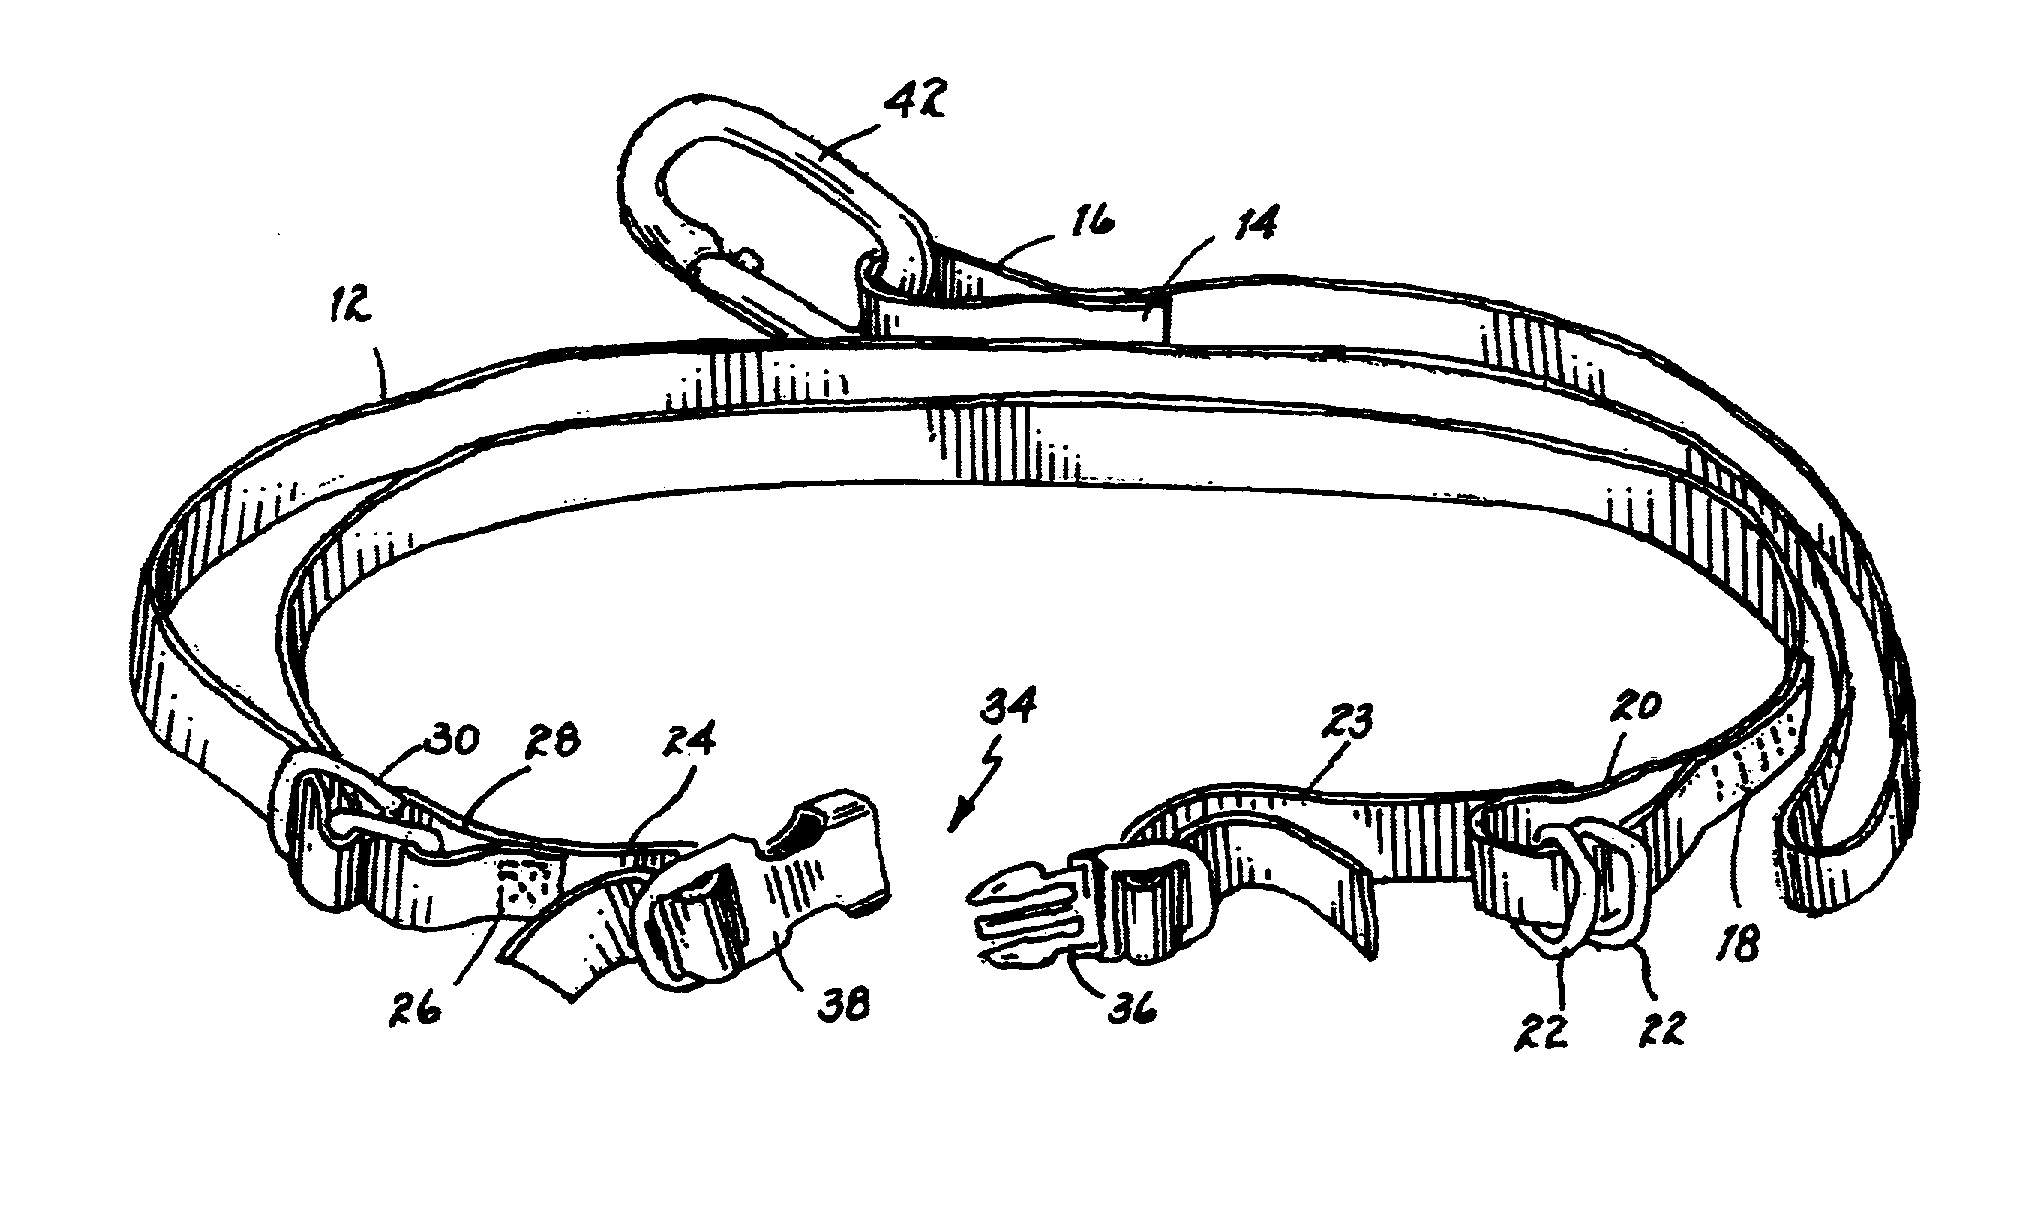 Multi-purpose utility strap and method therefor